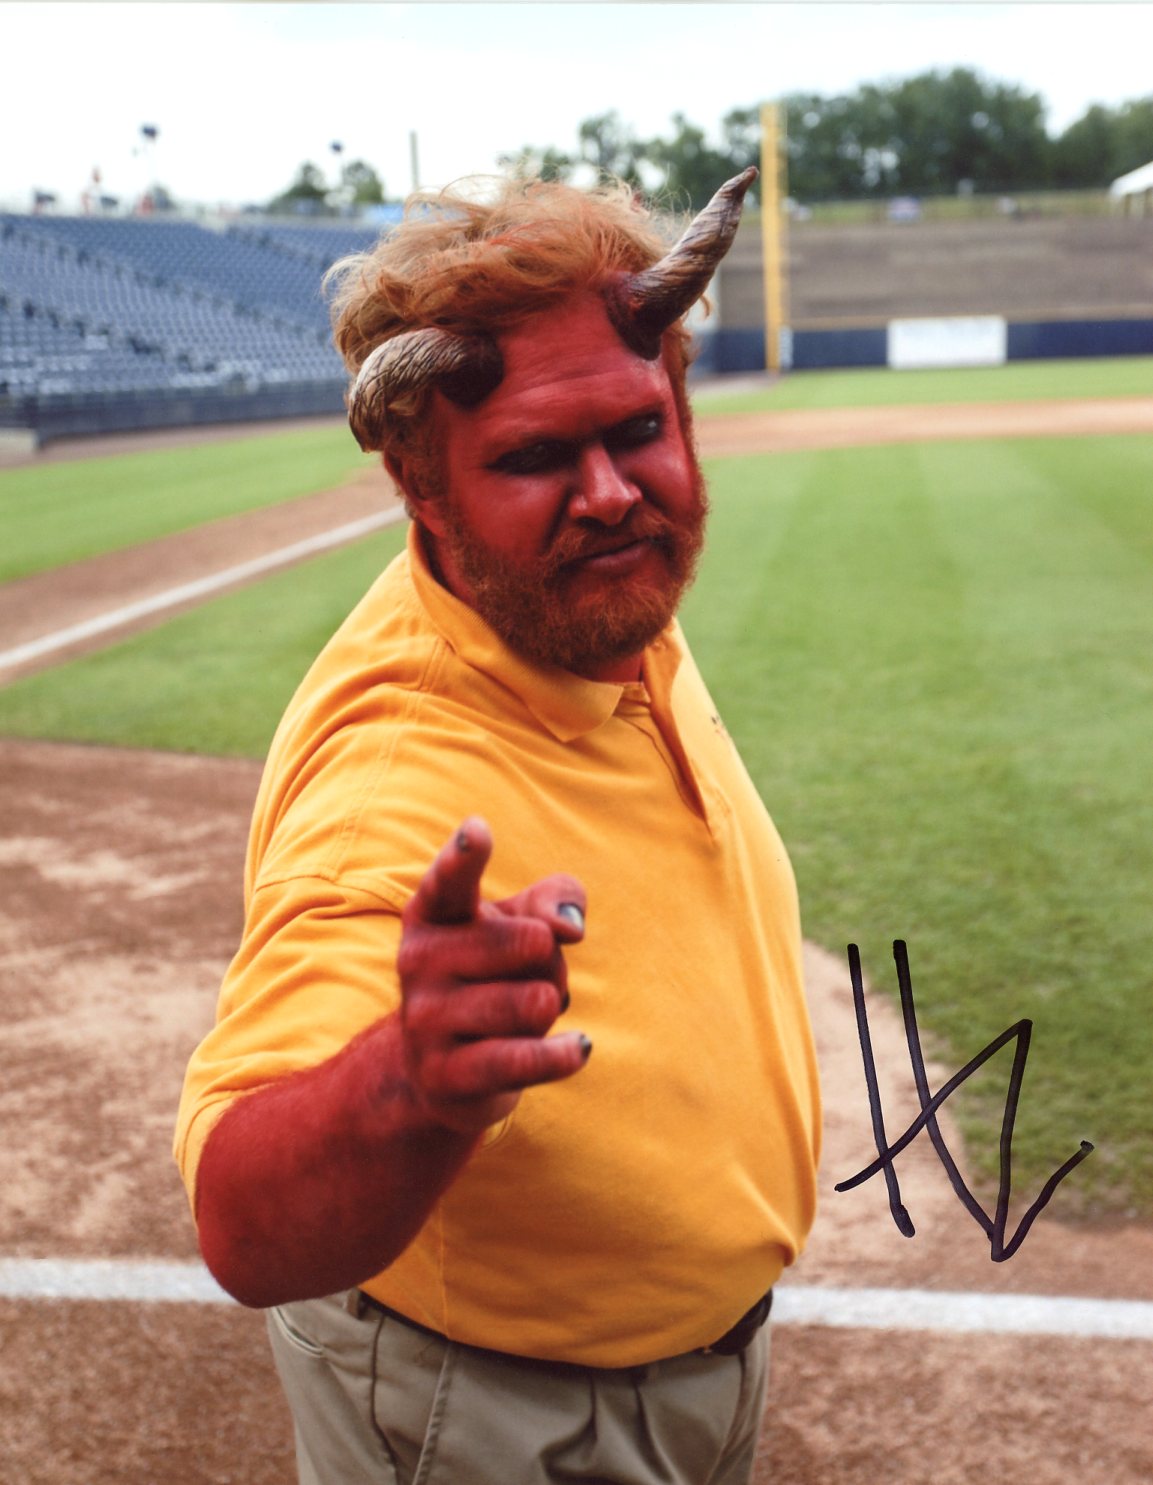 Henry Zebrowski Your Pretty Face is going to Hell 8x10 Signed Photo JSA Certified Autograph